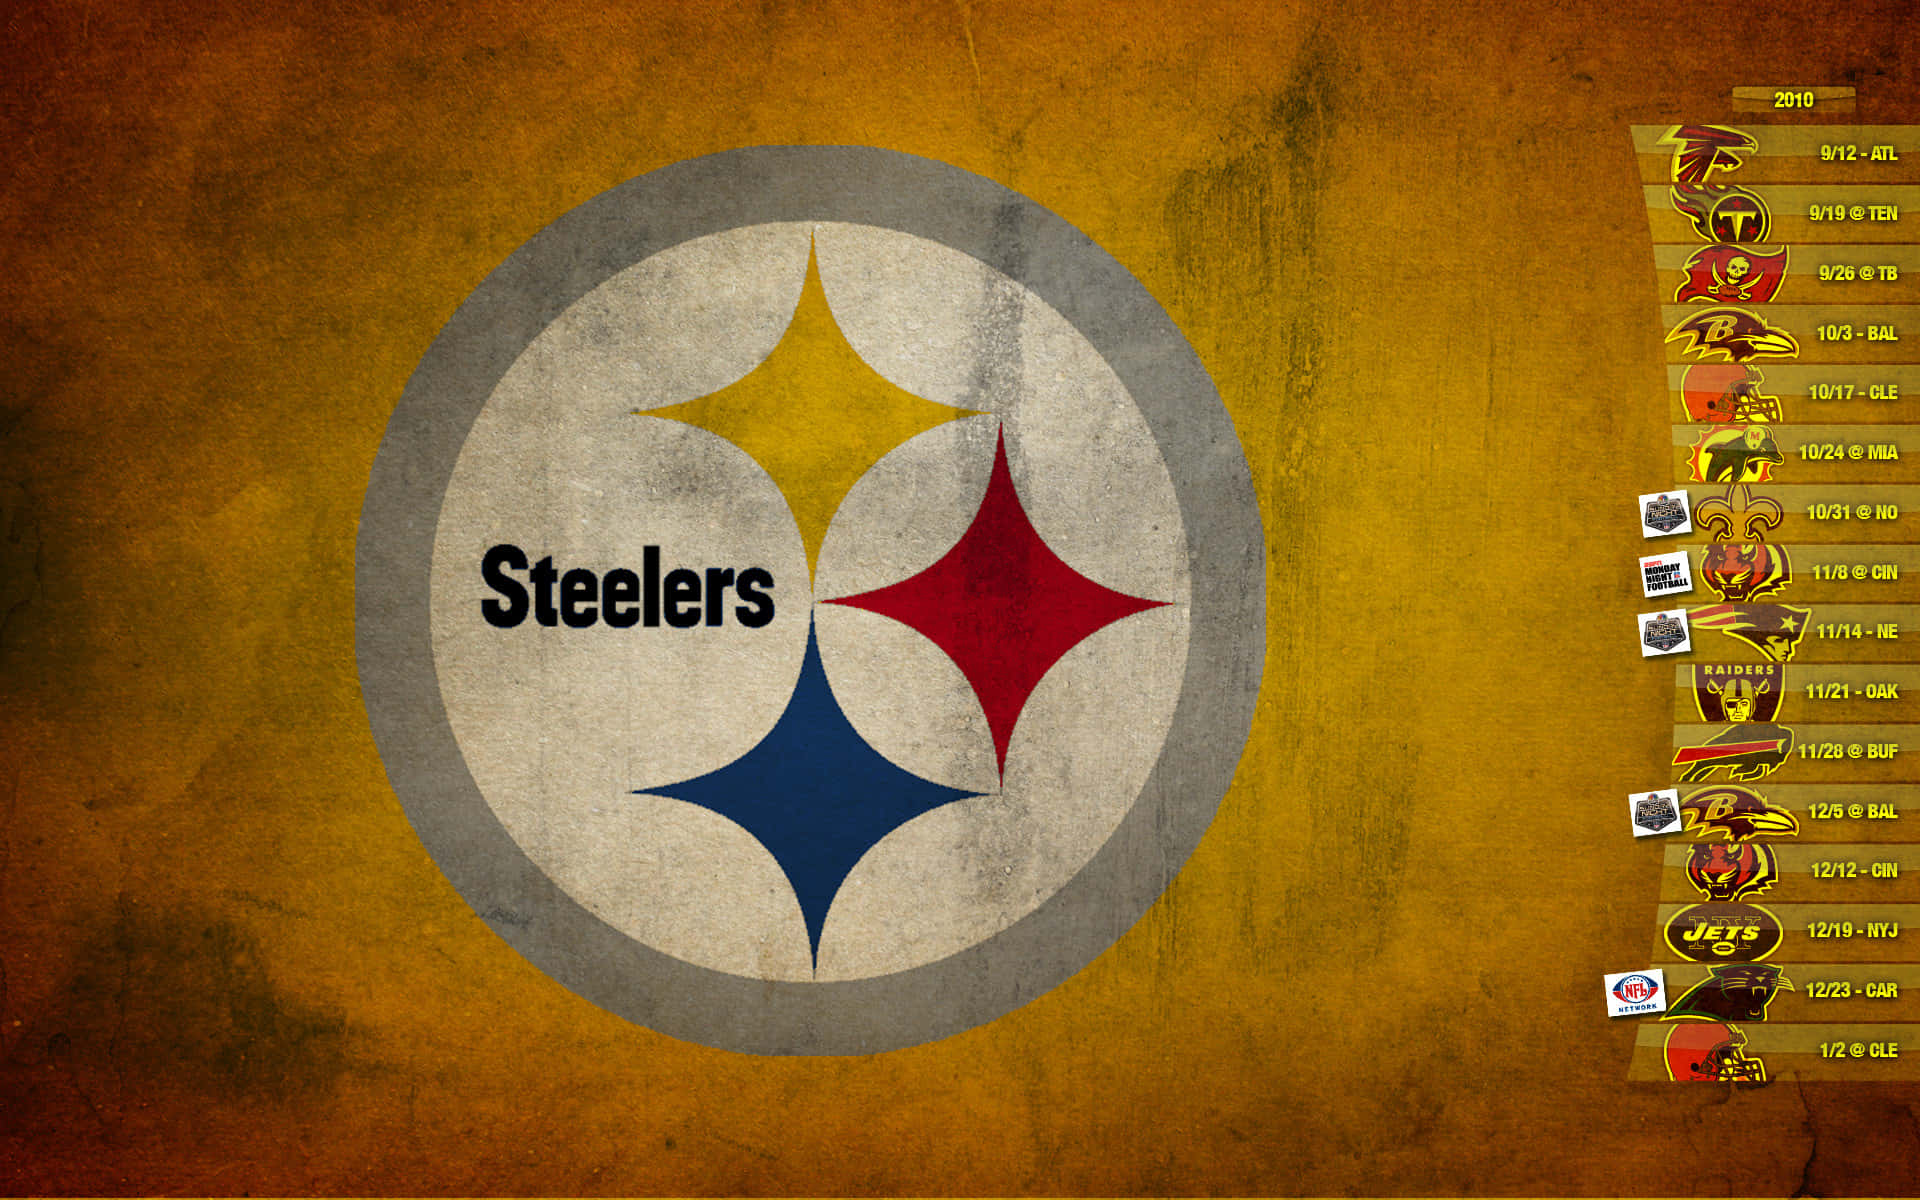 The Official Logo of the Pittsburgh Steelers Wallpaper